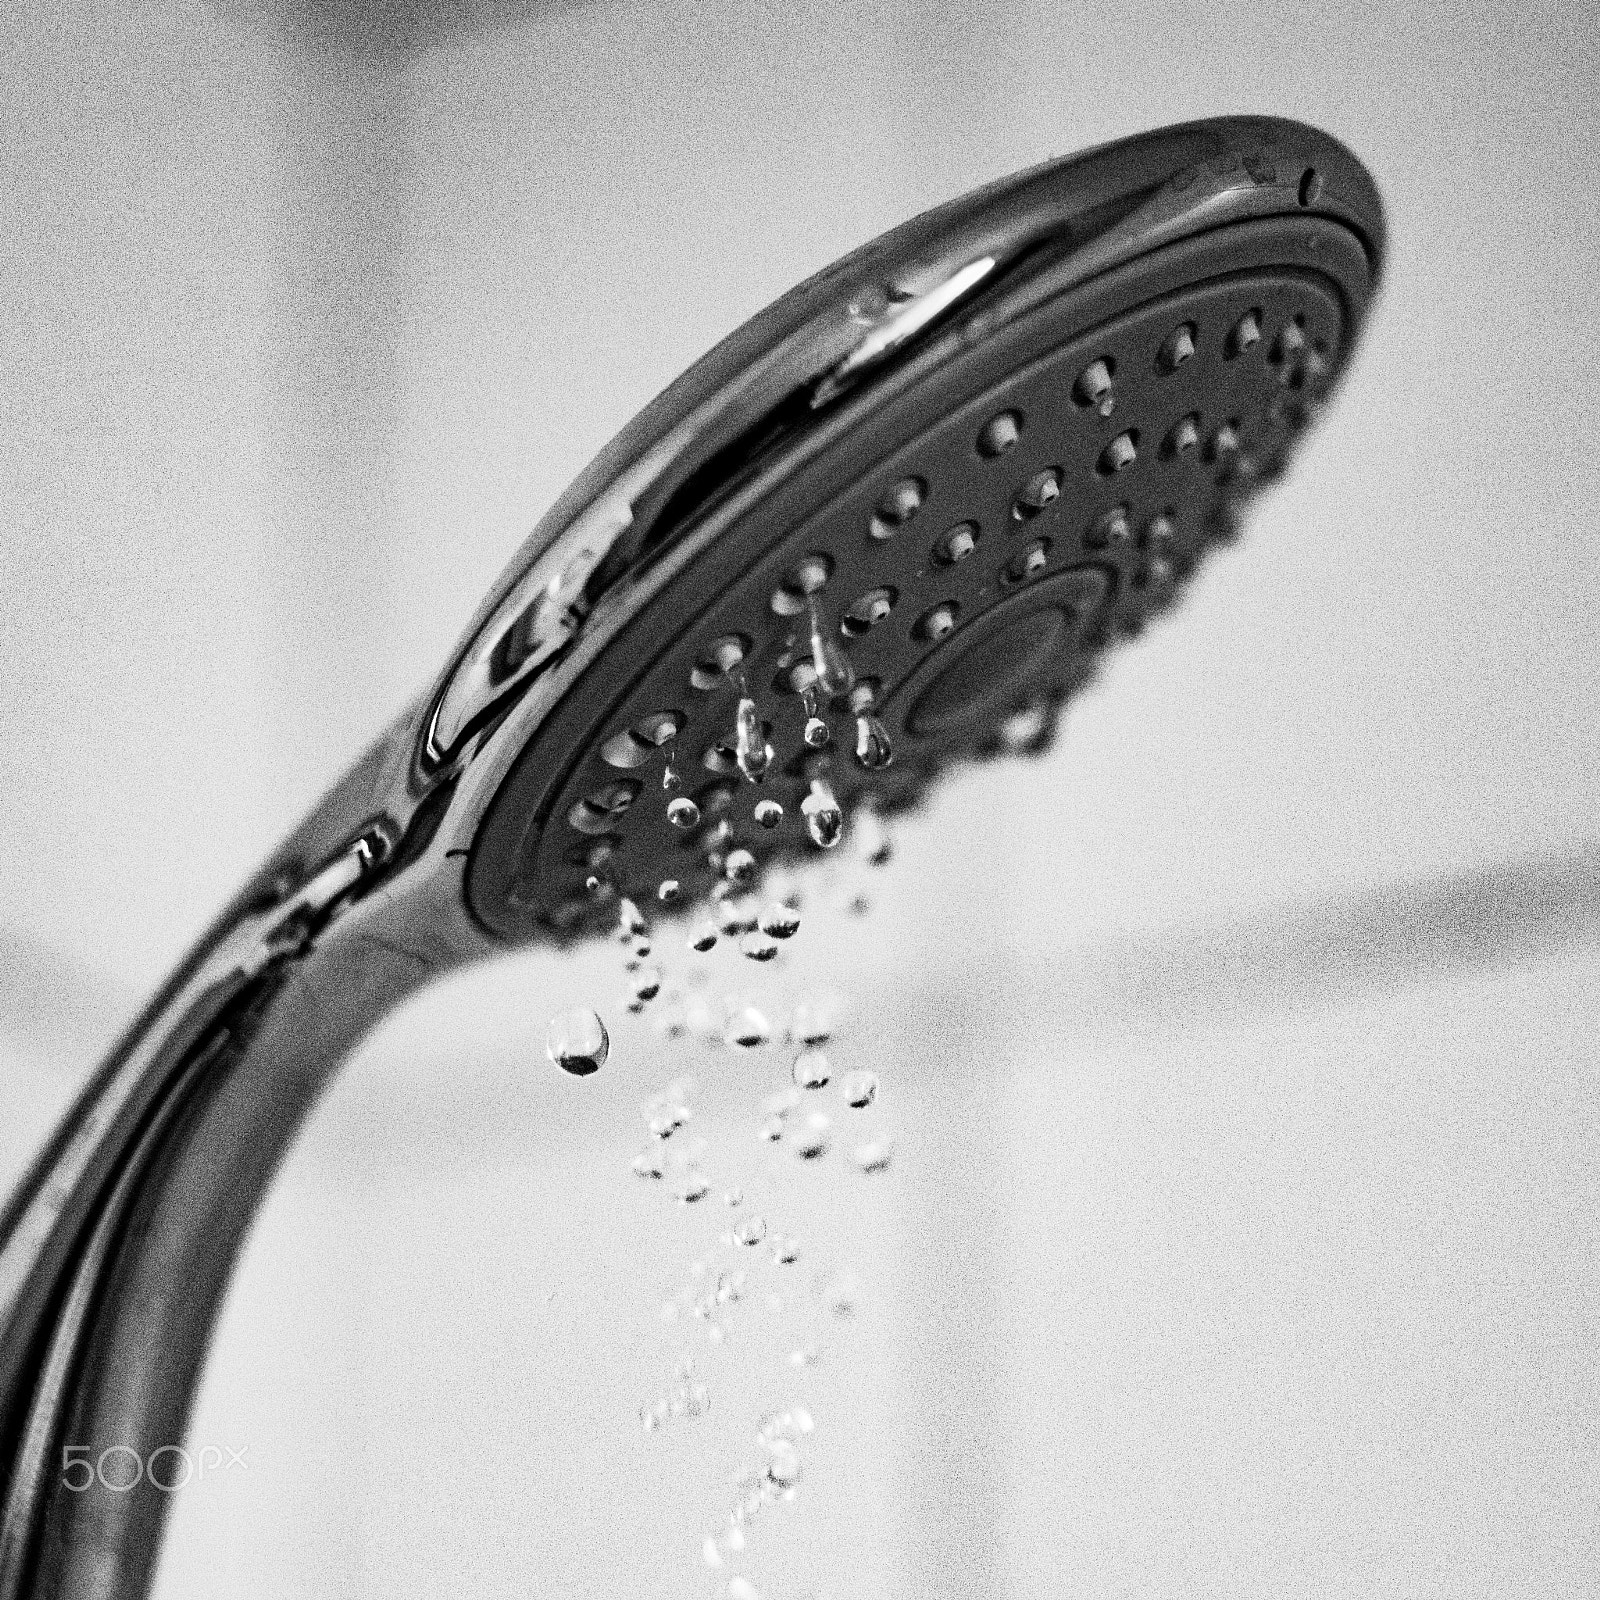 Pentax K-3 + Pentax smc FA 77mm 1.8 Limited sample photo. Shower drops photography